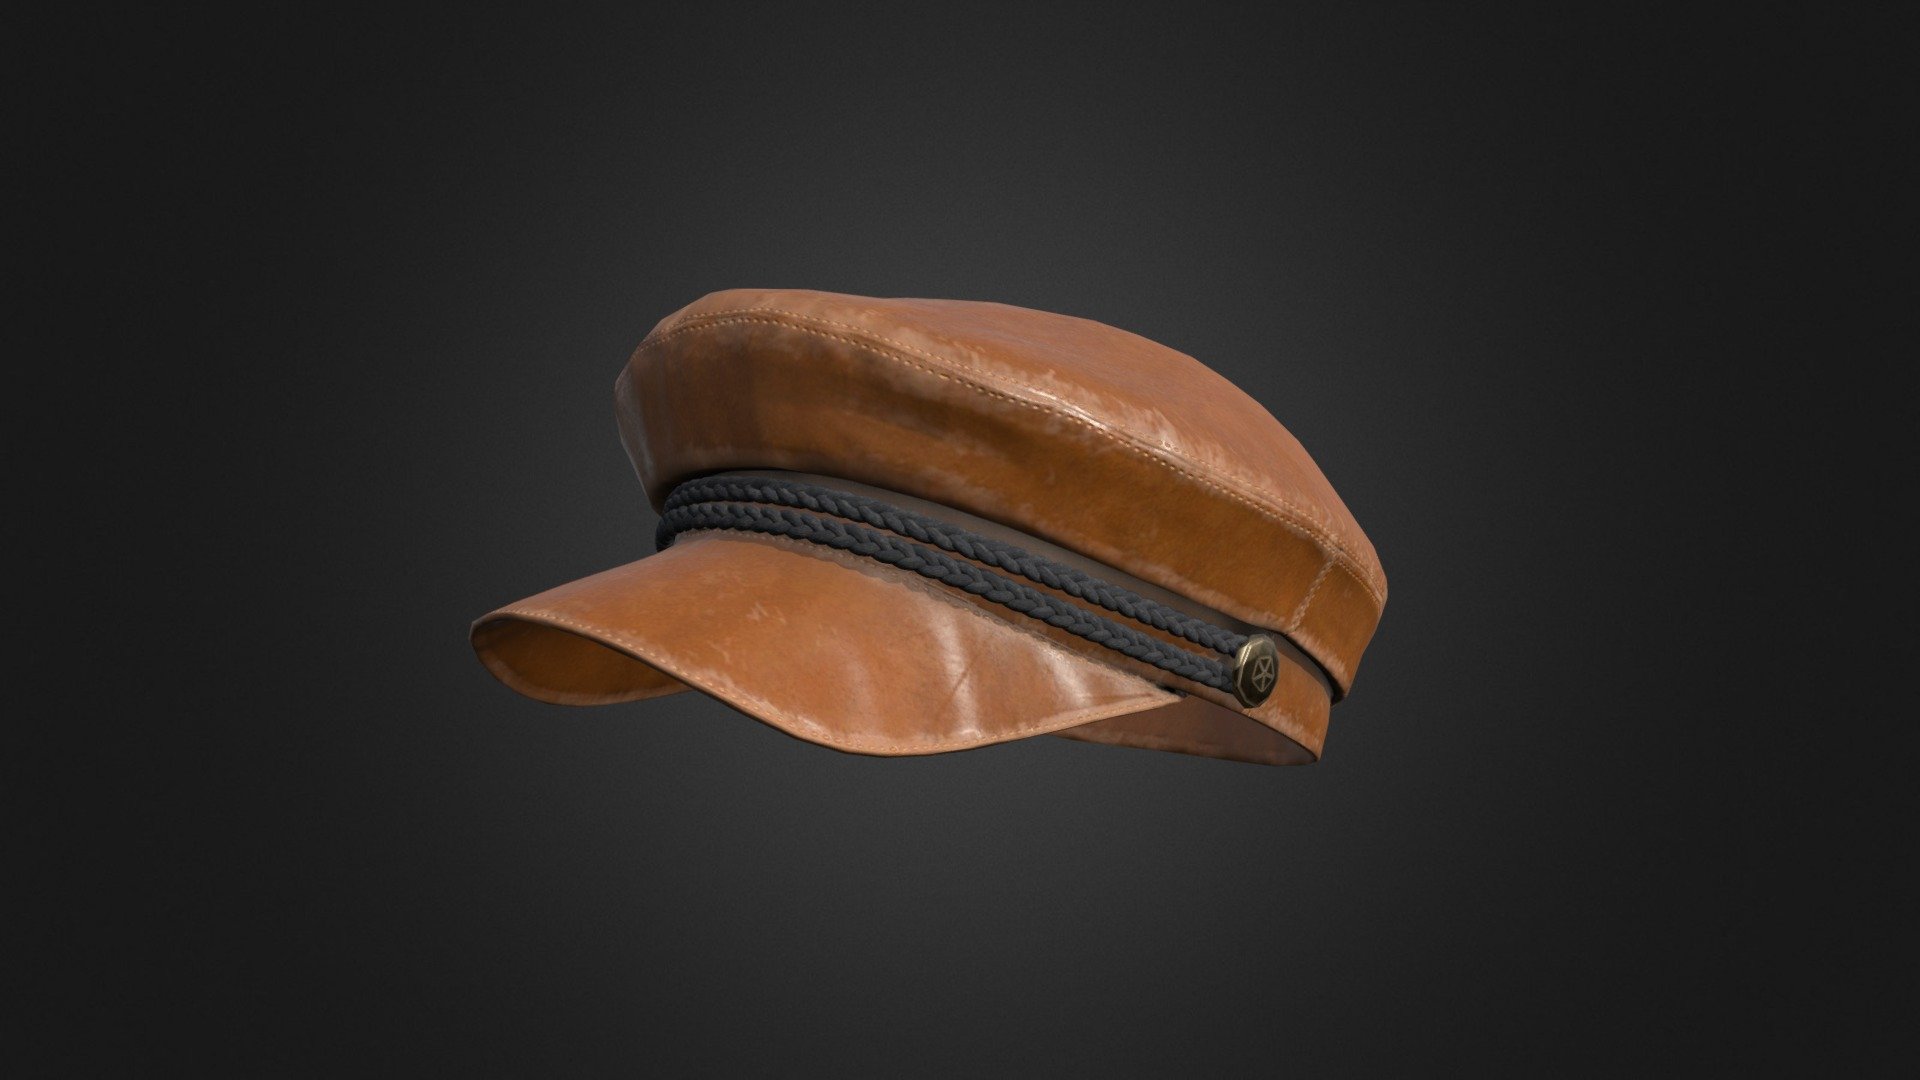 I used a leather material I created prior to this project, and just added height details for the stitches. You can get the leather material (for Substance Painter), here: https://www.artstation.com/michalzisman/store/qojm/everyday-leather-smart-material

Hope you like it! - Old Leather Captain Hat - 3D model by michalzisman 3d model